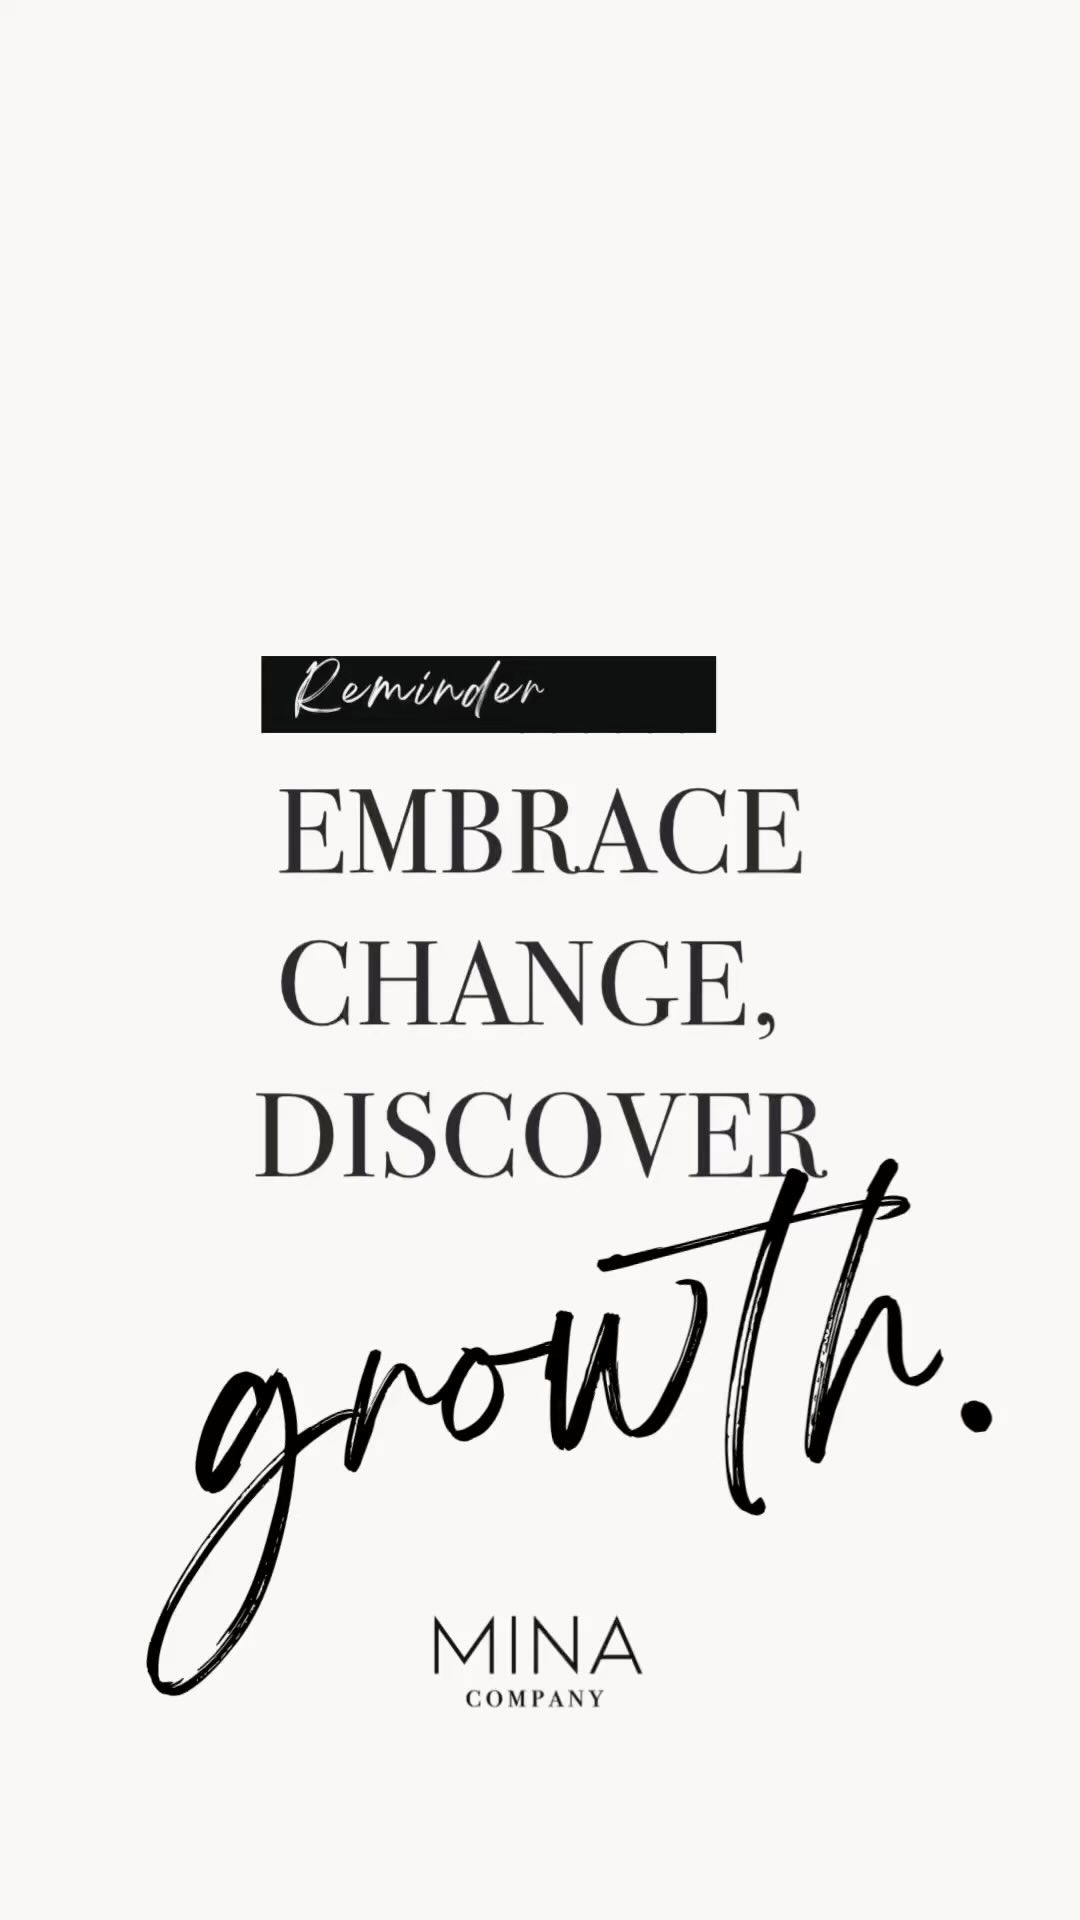 💗Embrace your entrepreneurial spirit with Mina Company, 

Loveland’s thriving boutique marketing agency exclusively designed by and for visionary women. 💪🏼 

👩🏼‍💻We’re here to elevate your brand, ignite your passion, and propel your business towards real success. 💯

🌈Unleash the power of our personalized strategies, tap into your boundless creativity, and watch your dreams flourish. 

Ready to bloom? 🌻
Send us a DM & let’s make your business shine brighter than ever before. ✨

#MinaCompany #LovelandMarketing
#smallbizowner #successhabits #entrepreneur #startup #shoplocal #supportsmallbusiness #businessownerlife #businessgrowthstrategy #marketingtips4you #businessmotivation #businessstrategy #businessgoals #businessadvice #smallbizlove #womeninbusiness #creativentrepreneur #smallbusinesssaturday #smallbiztips #startups #growyourbusinessonline